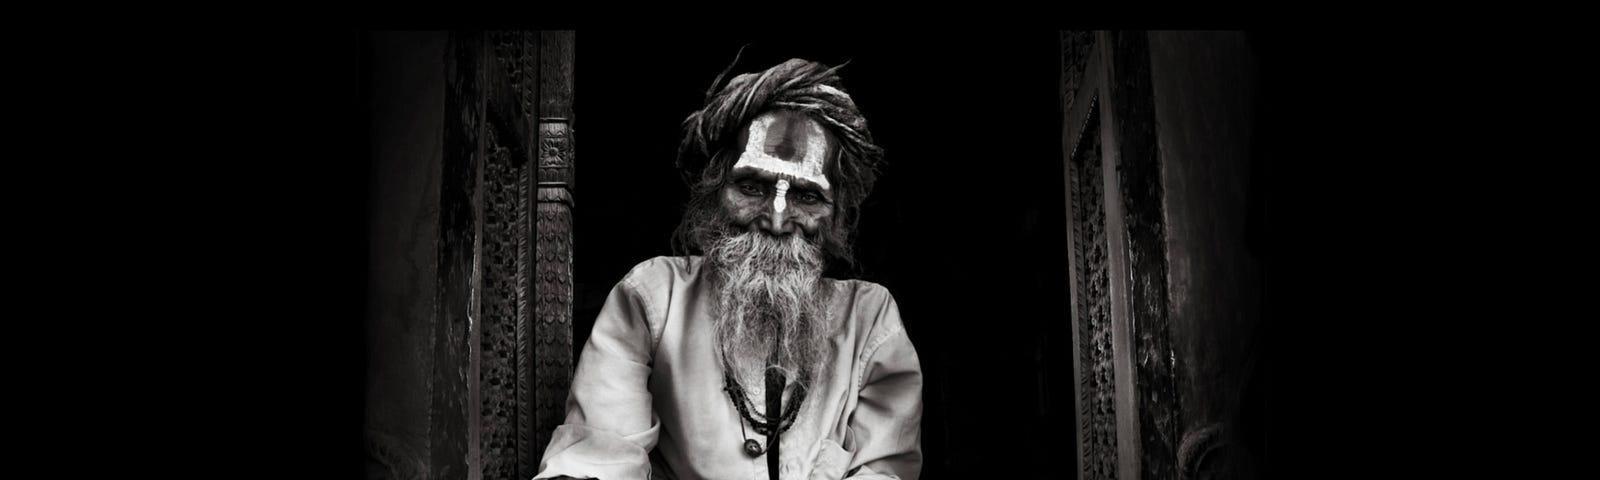 Alice Kim’s Soulful Art. Black and white portrait of an old sadhu sitting in lotus position